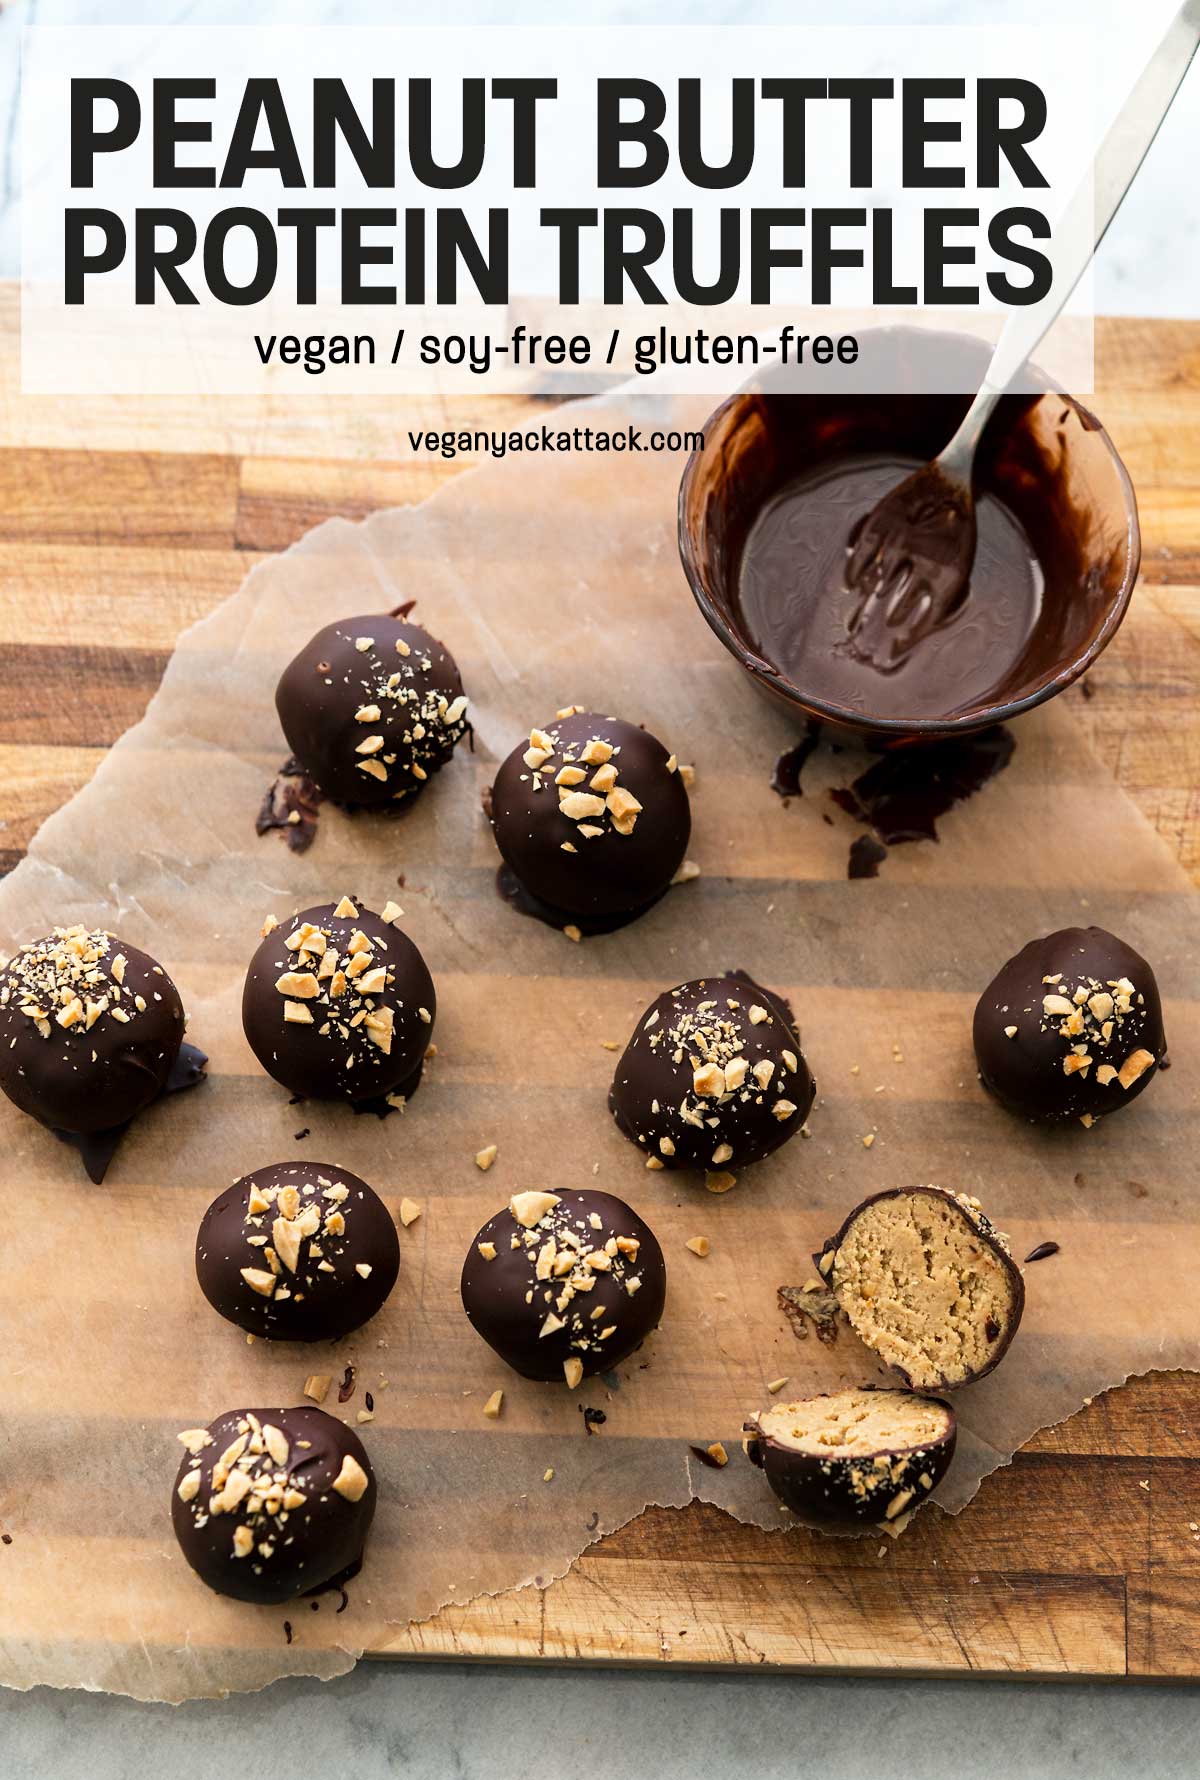 Chocolate-covered peanut butter bites on a cutting board next to melted chocolate